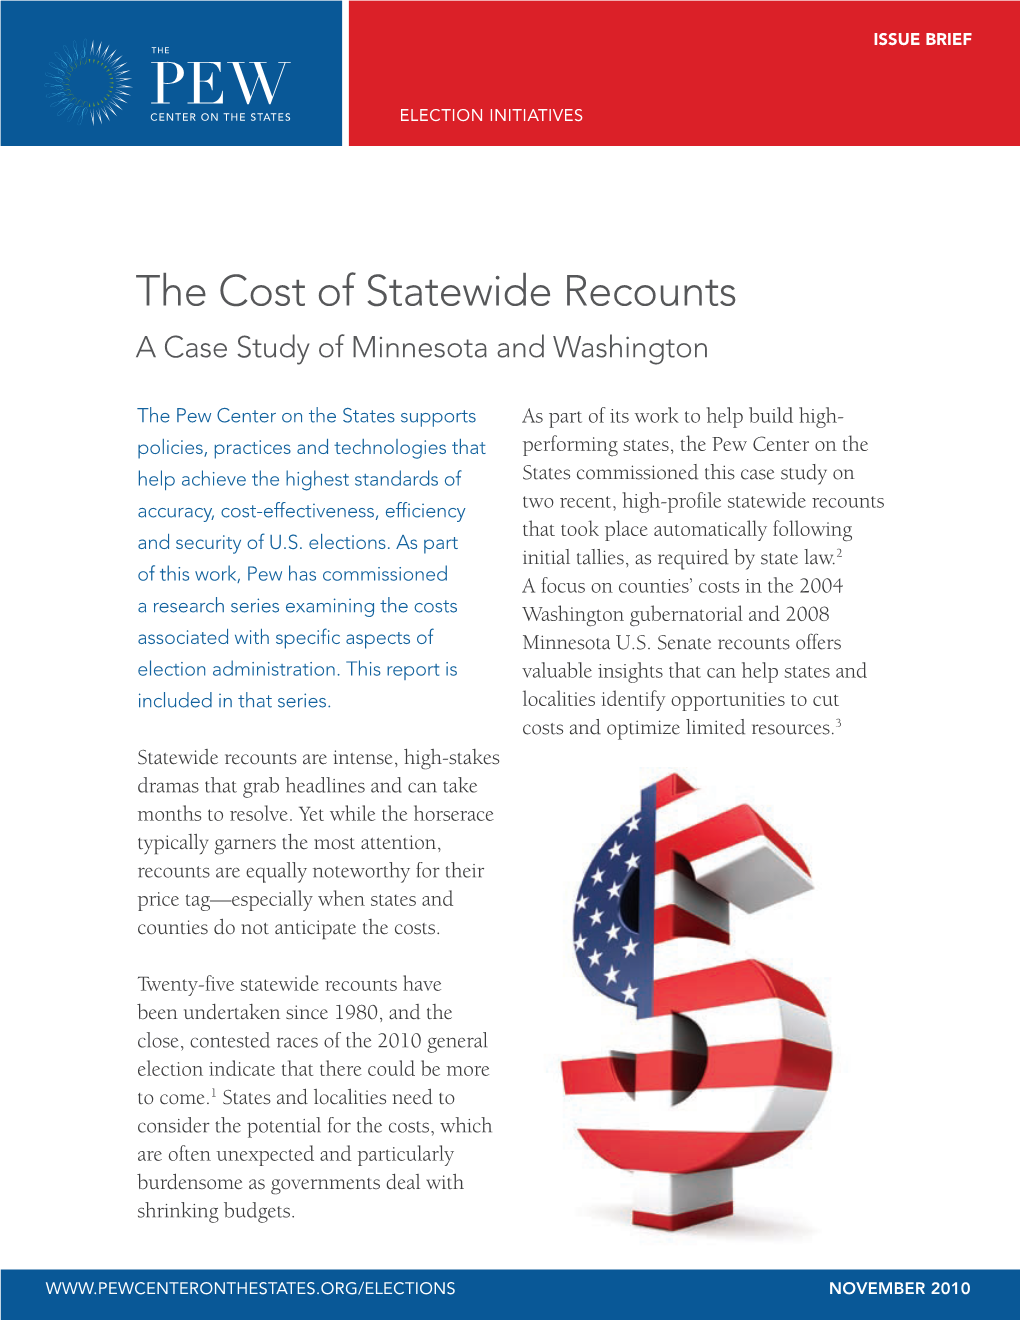 The Cost of Statewide Recounts a Case Study of Minnesota and Washington